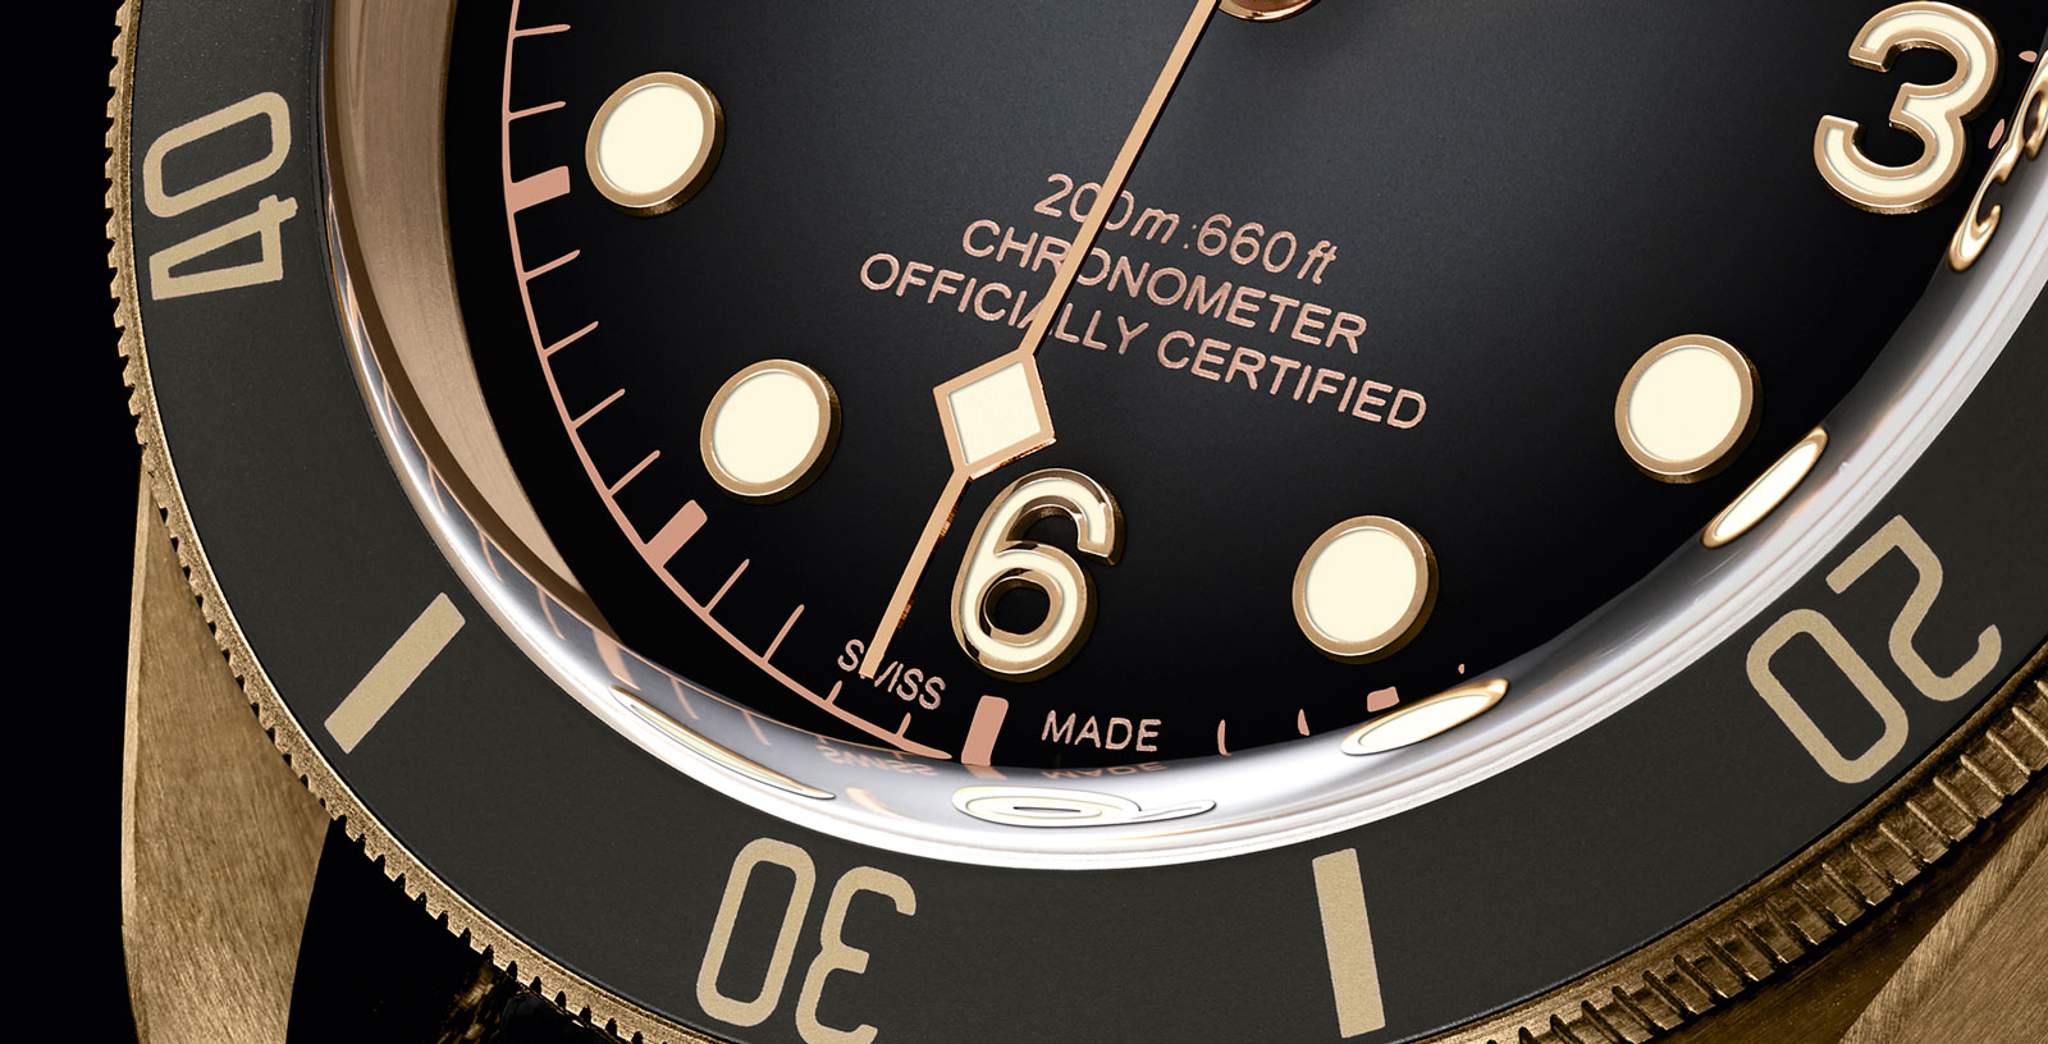 Swiss Watch Certifications: Chronometer (COSC), METAS, and Rolex ...